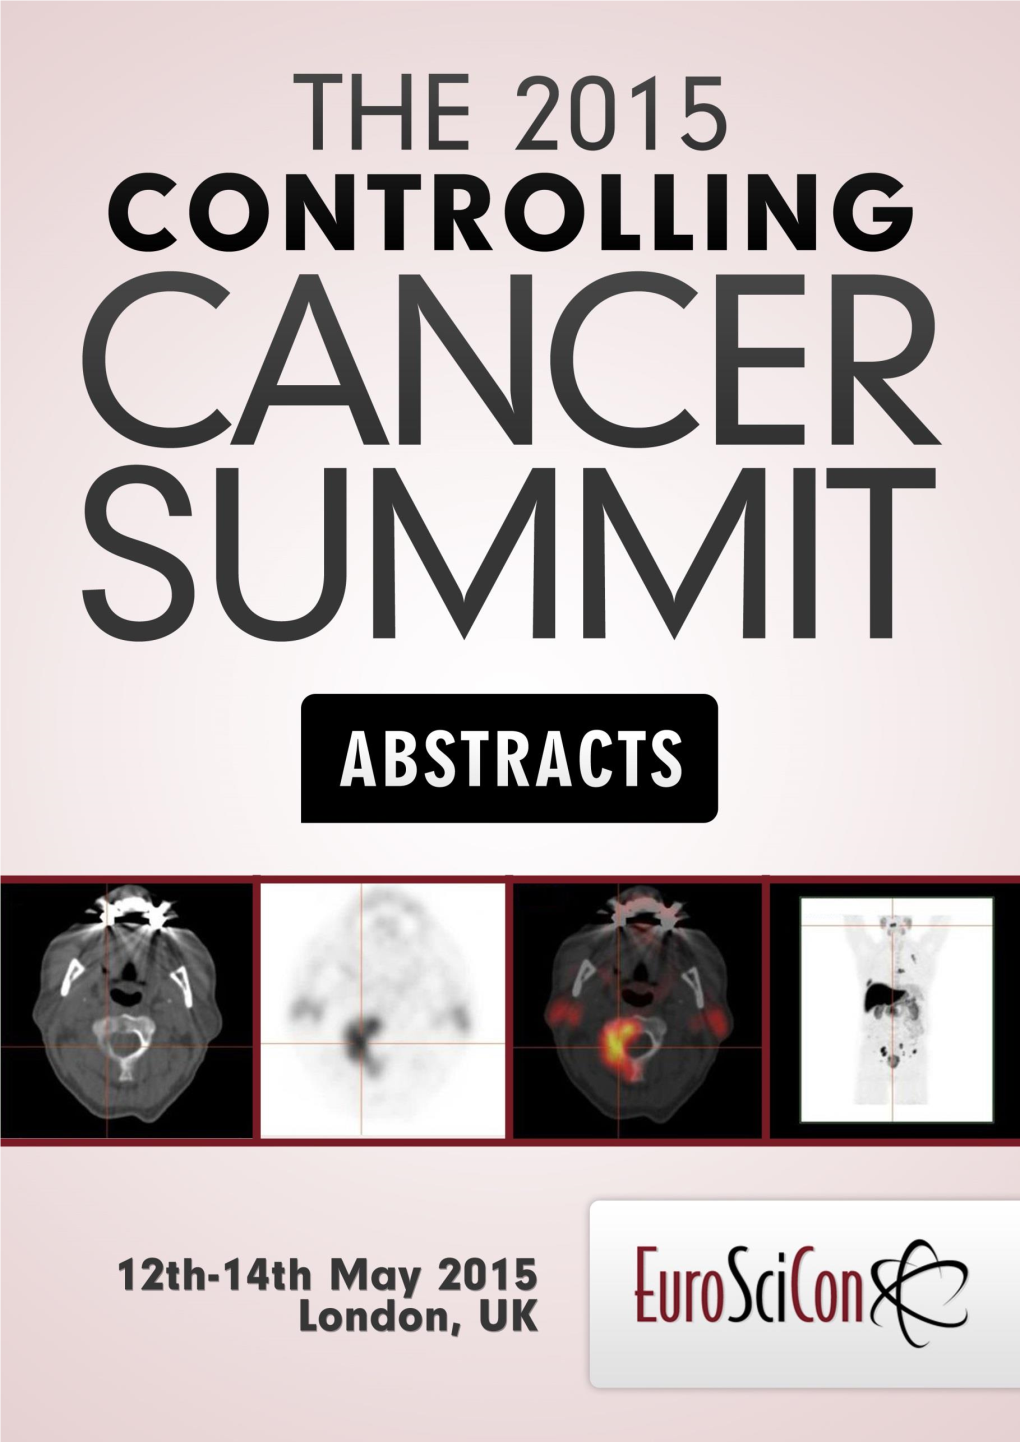 CANCERABSTRACTS2015.Pdf